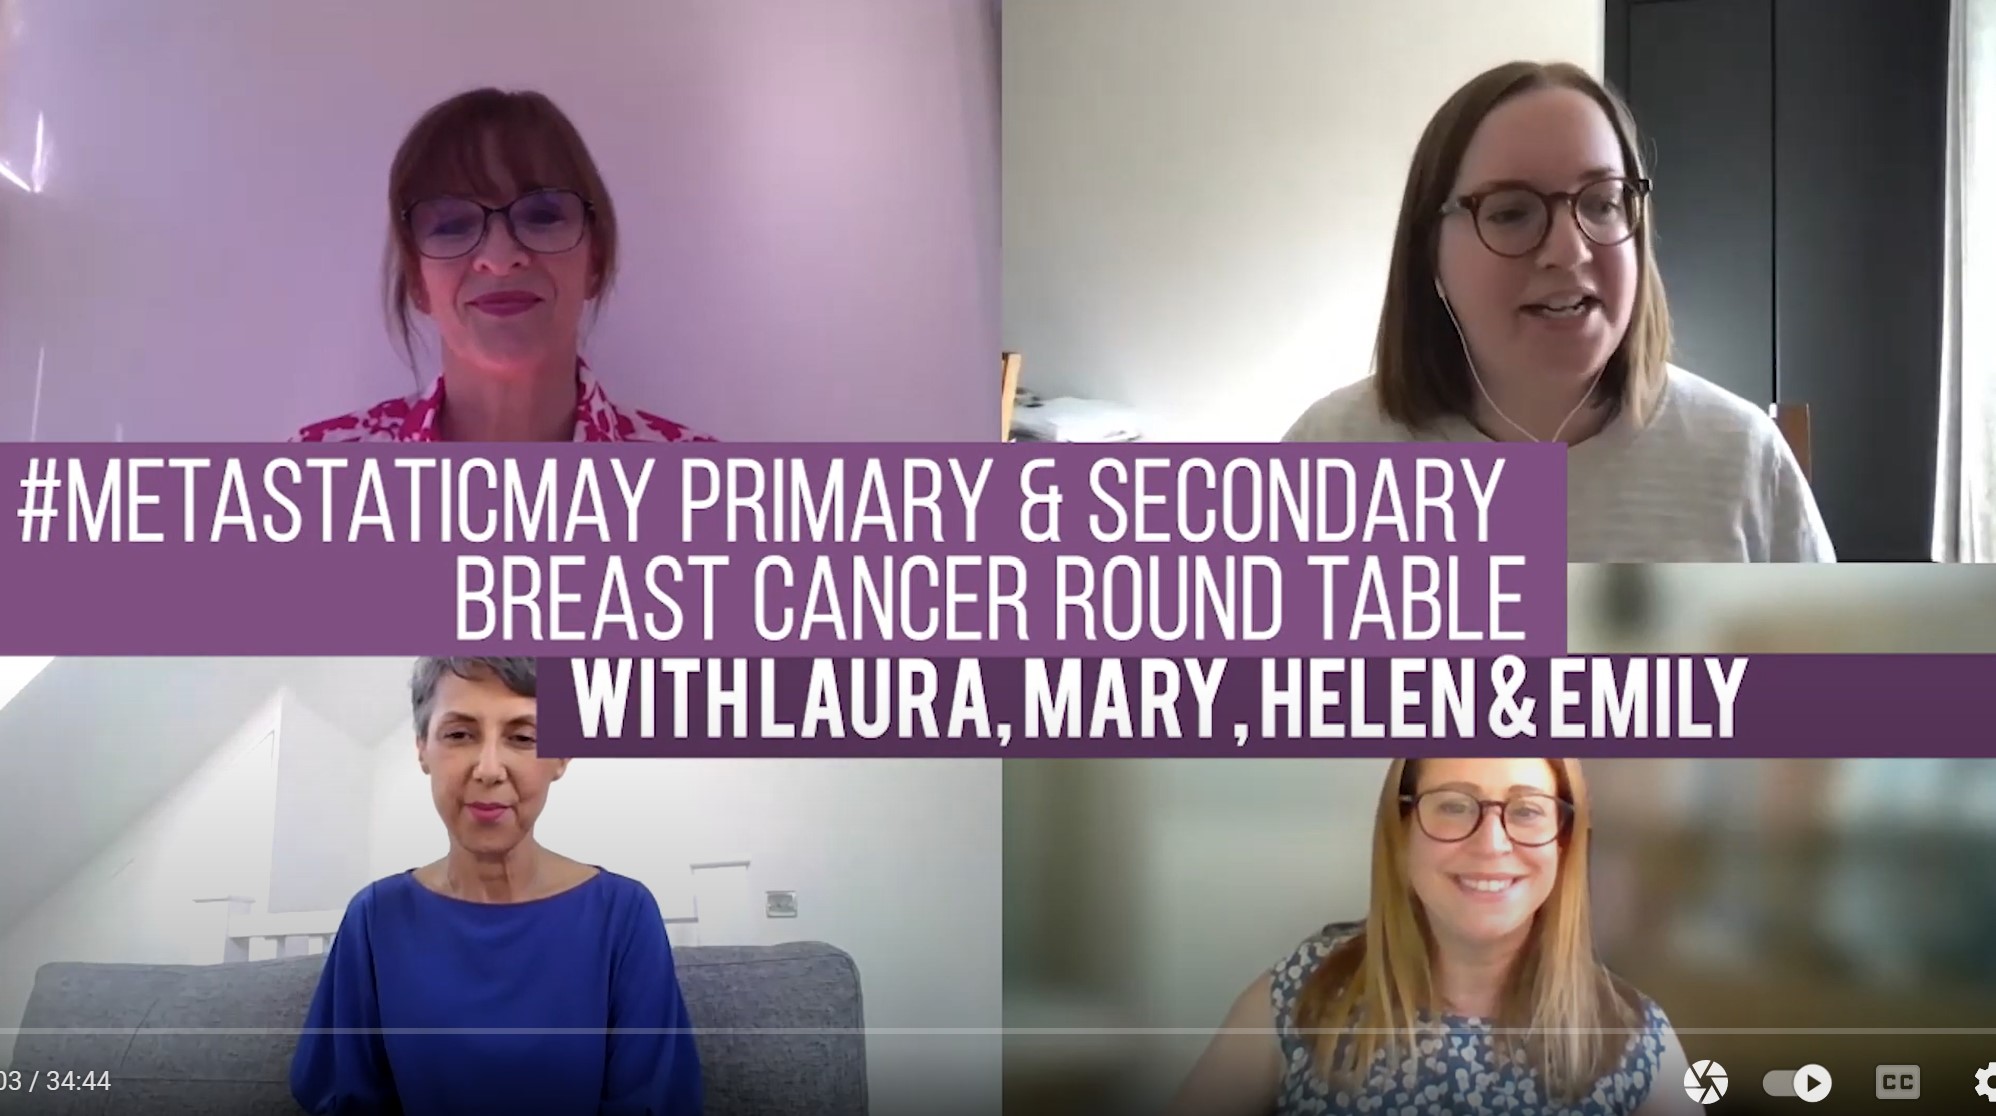 Join us as Laura, Mary Helen & Emily discuss primary & secondary breast cancer.